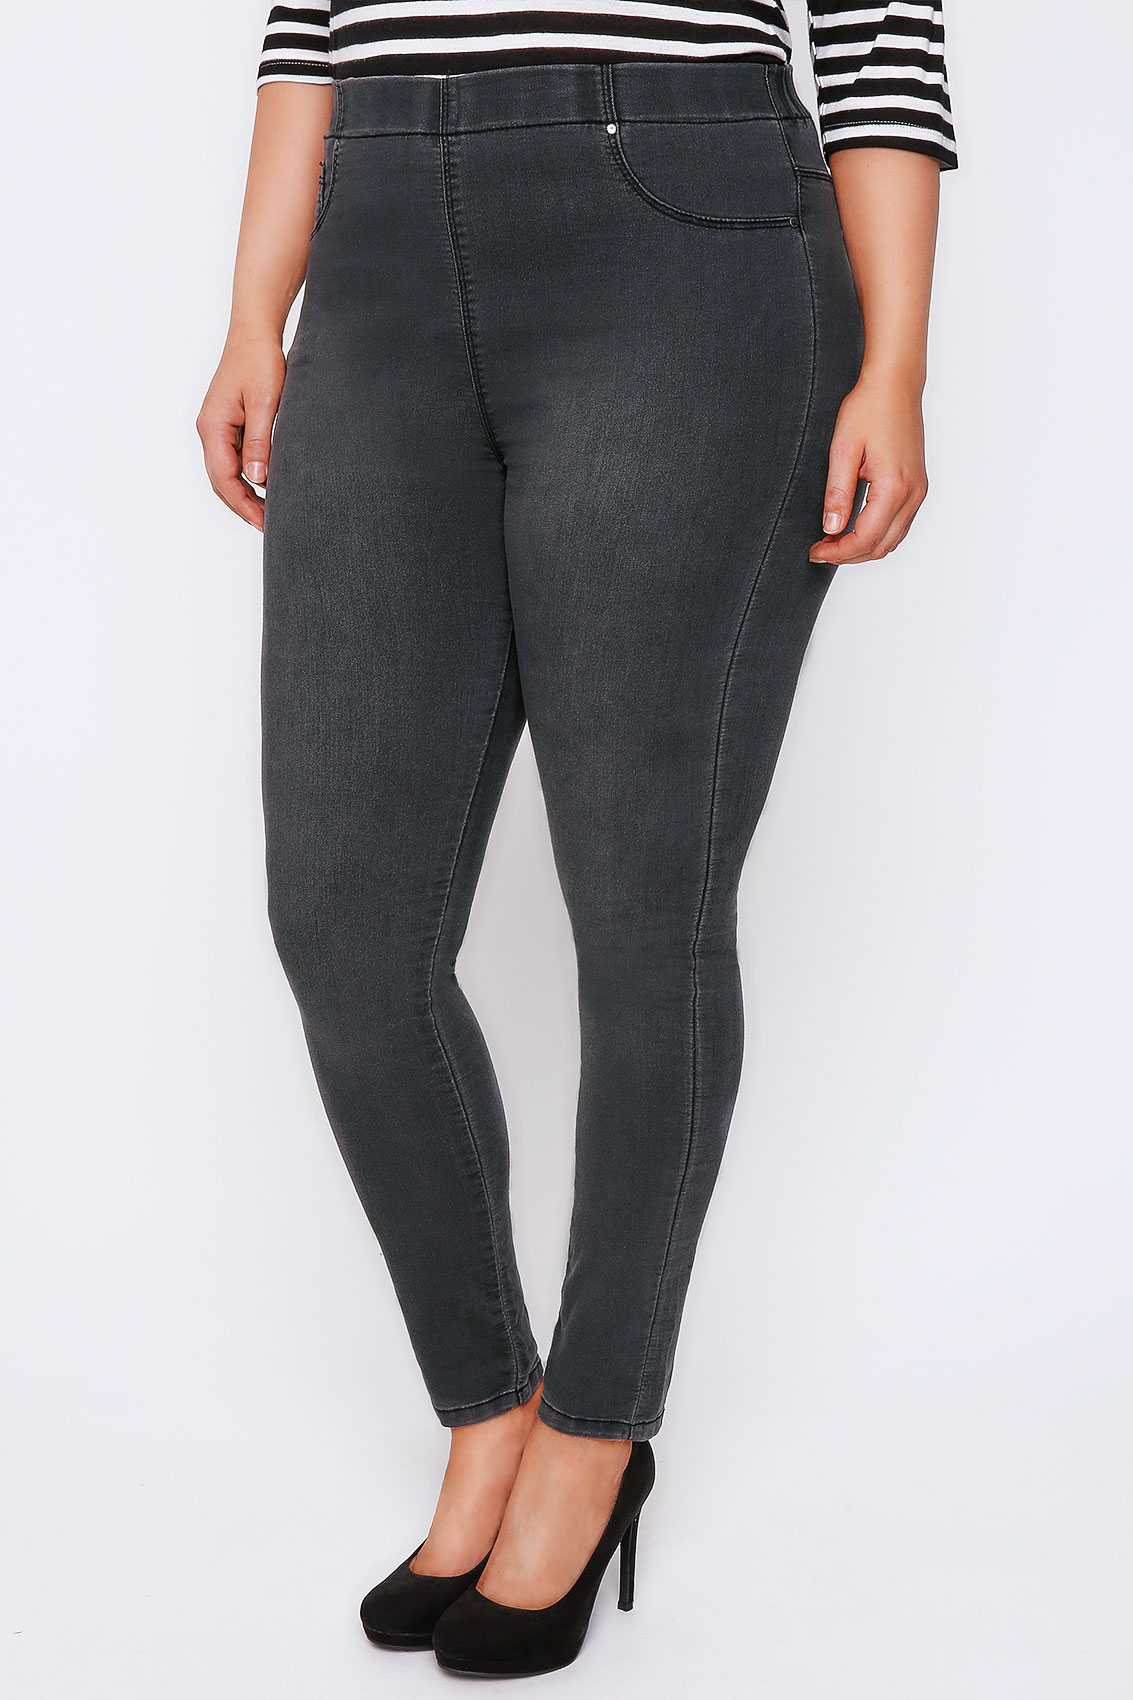 Grey Faded Denim Jeggings Plus Size 16 to 32